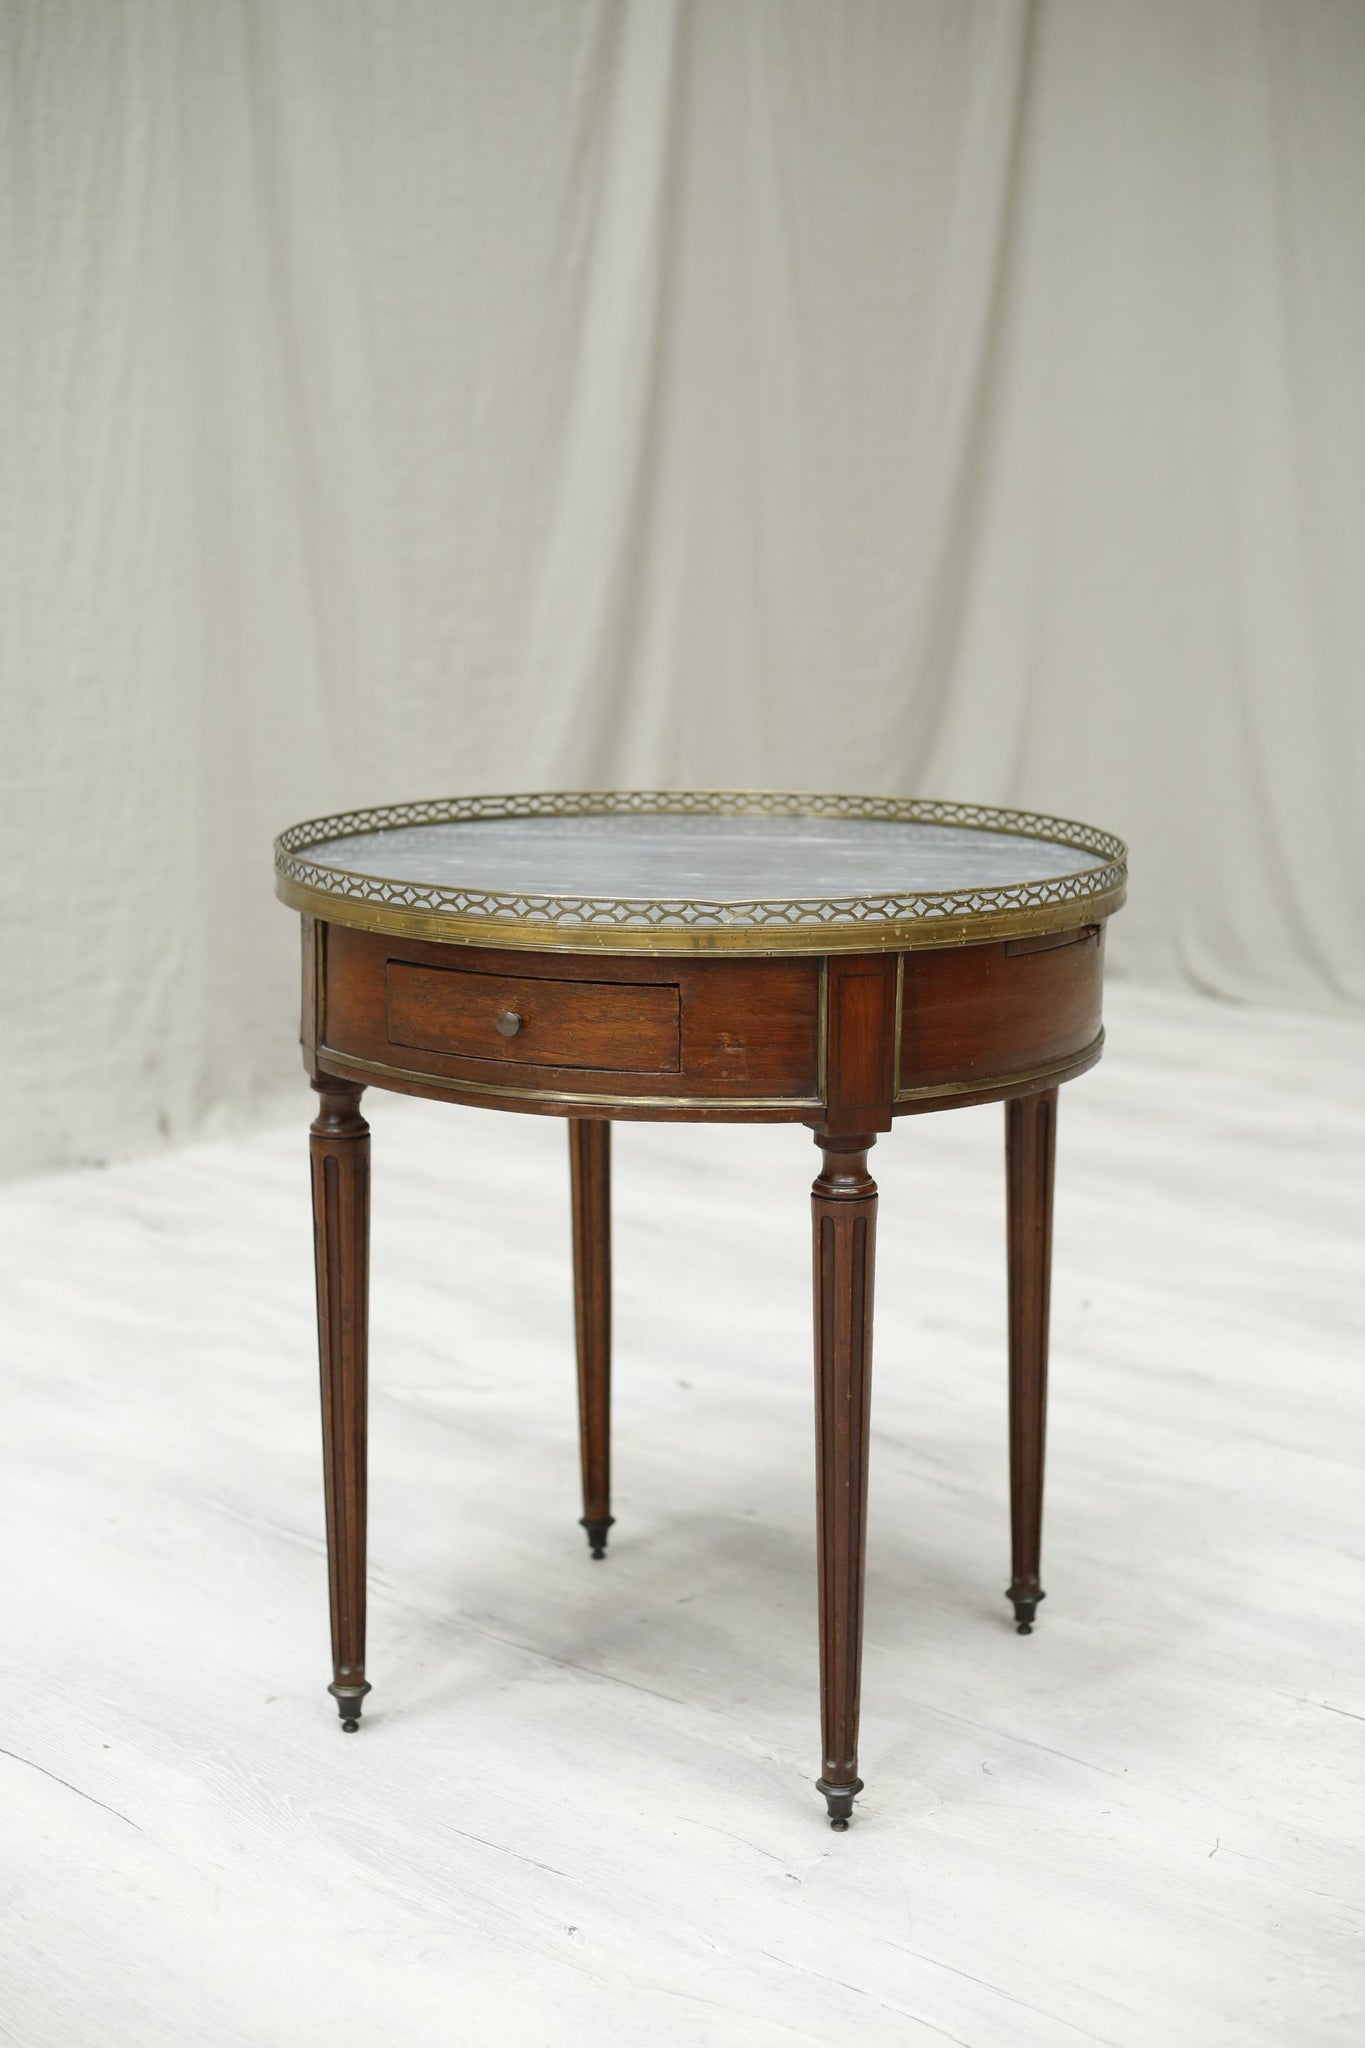 19th century antique French empire marble topped lamp table - TallBoy Interiors